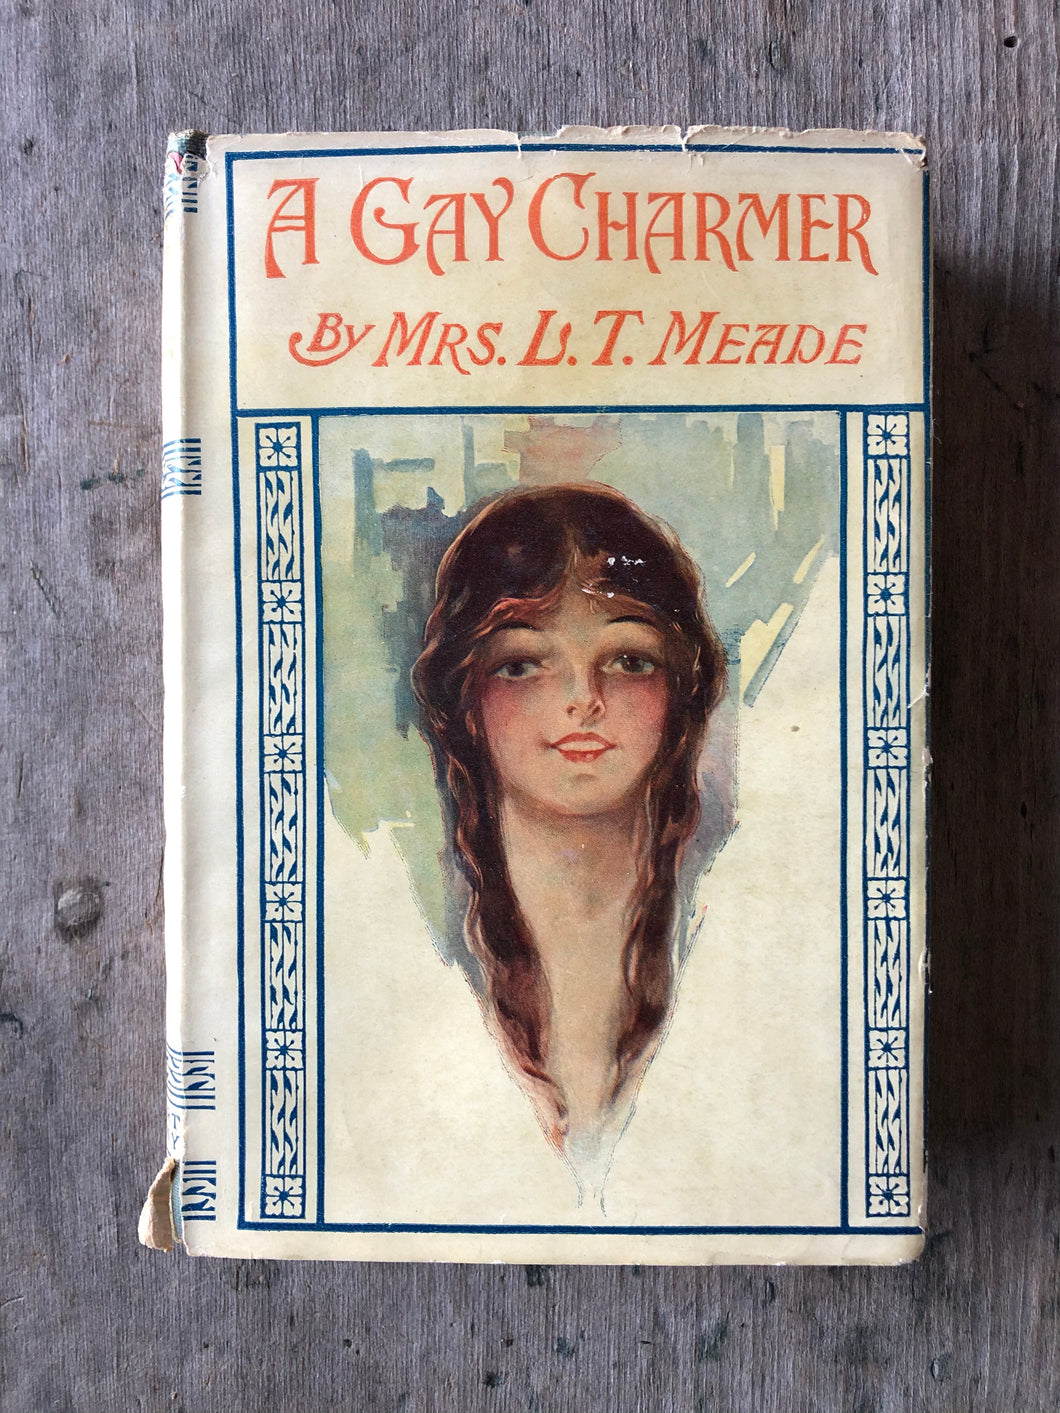 A Gay Charmer by L. T. Meade